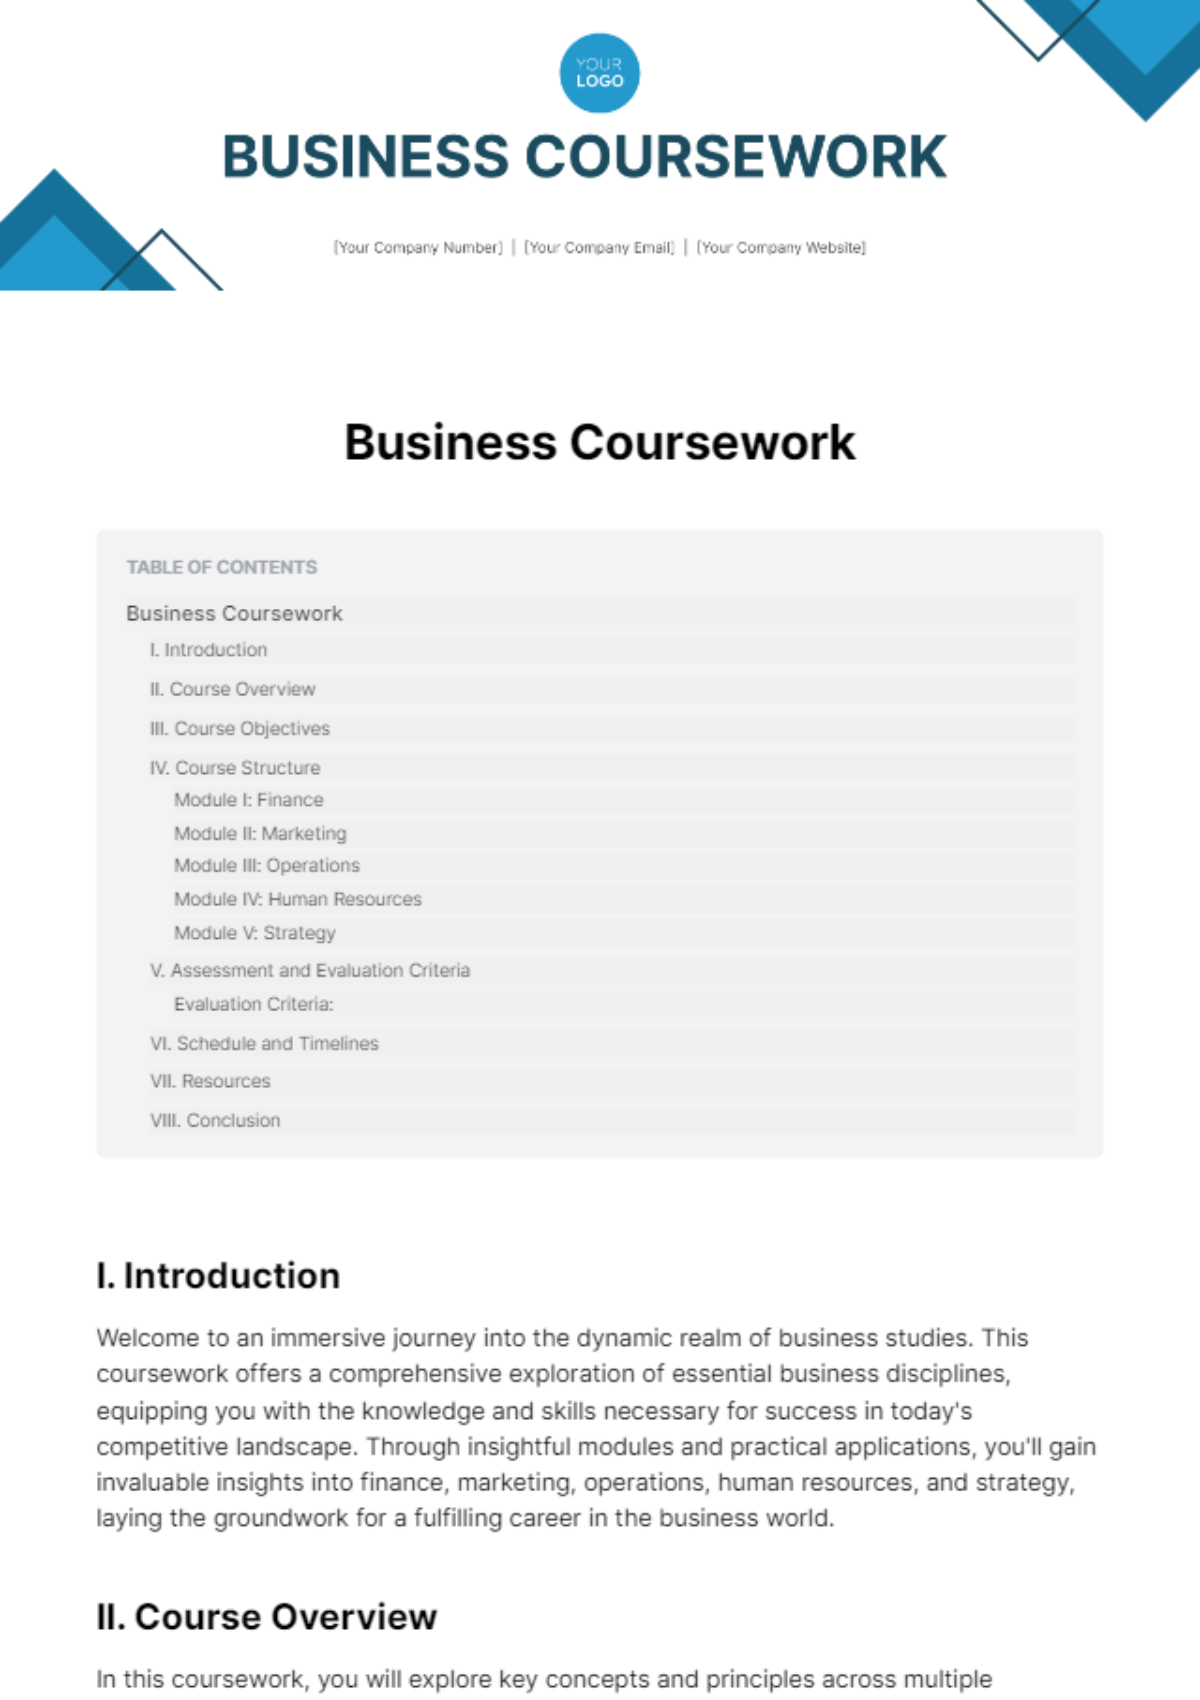 Business Coursework Template